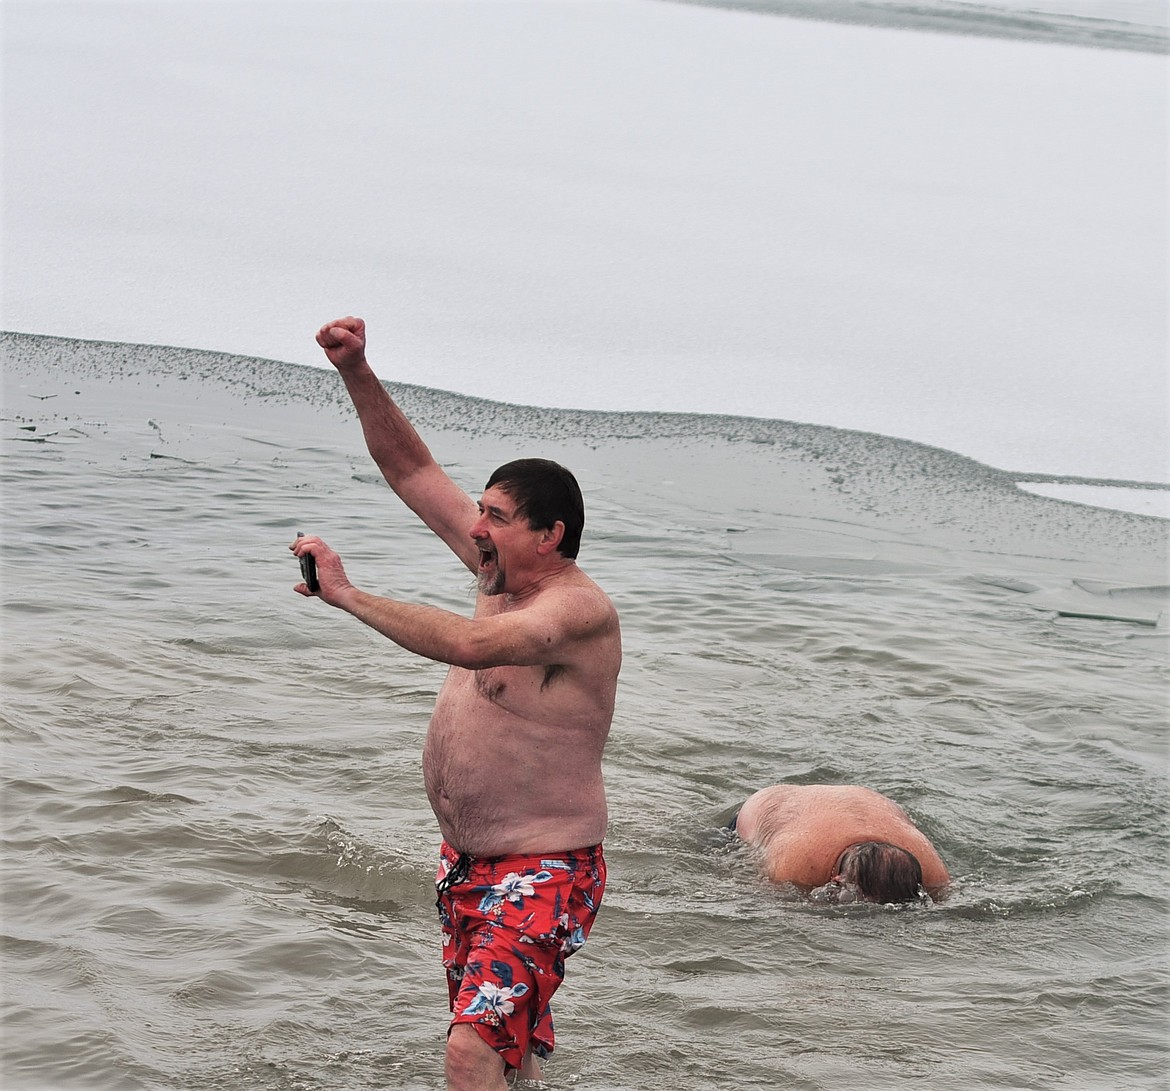 Dave Bull celebrates another plunge. He's been participating in the Riverside Park event since 1999. (Scot Heisel/Lake County Leader)